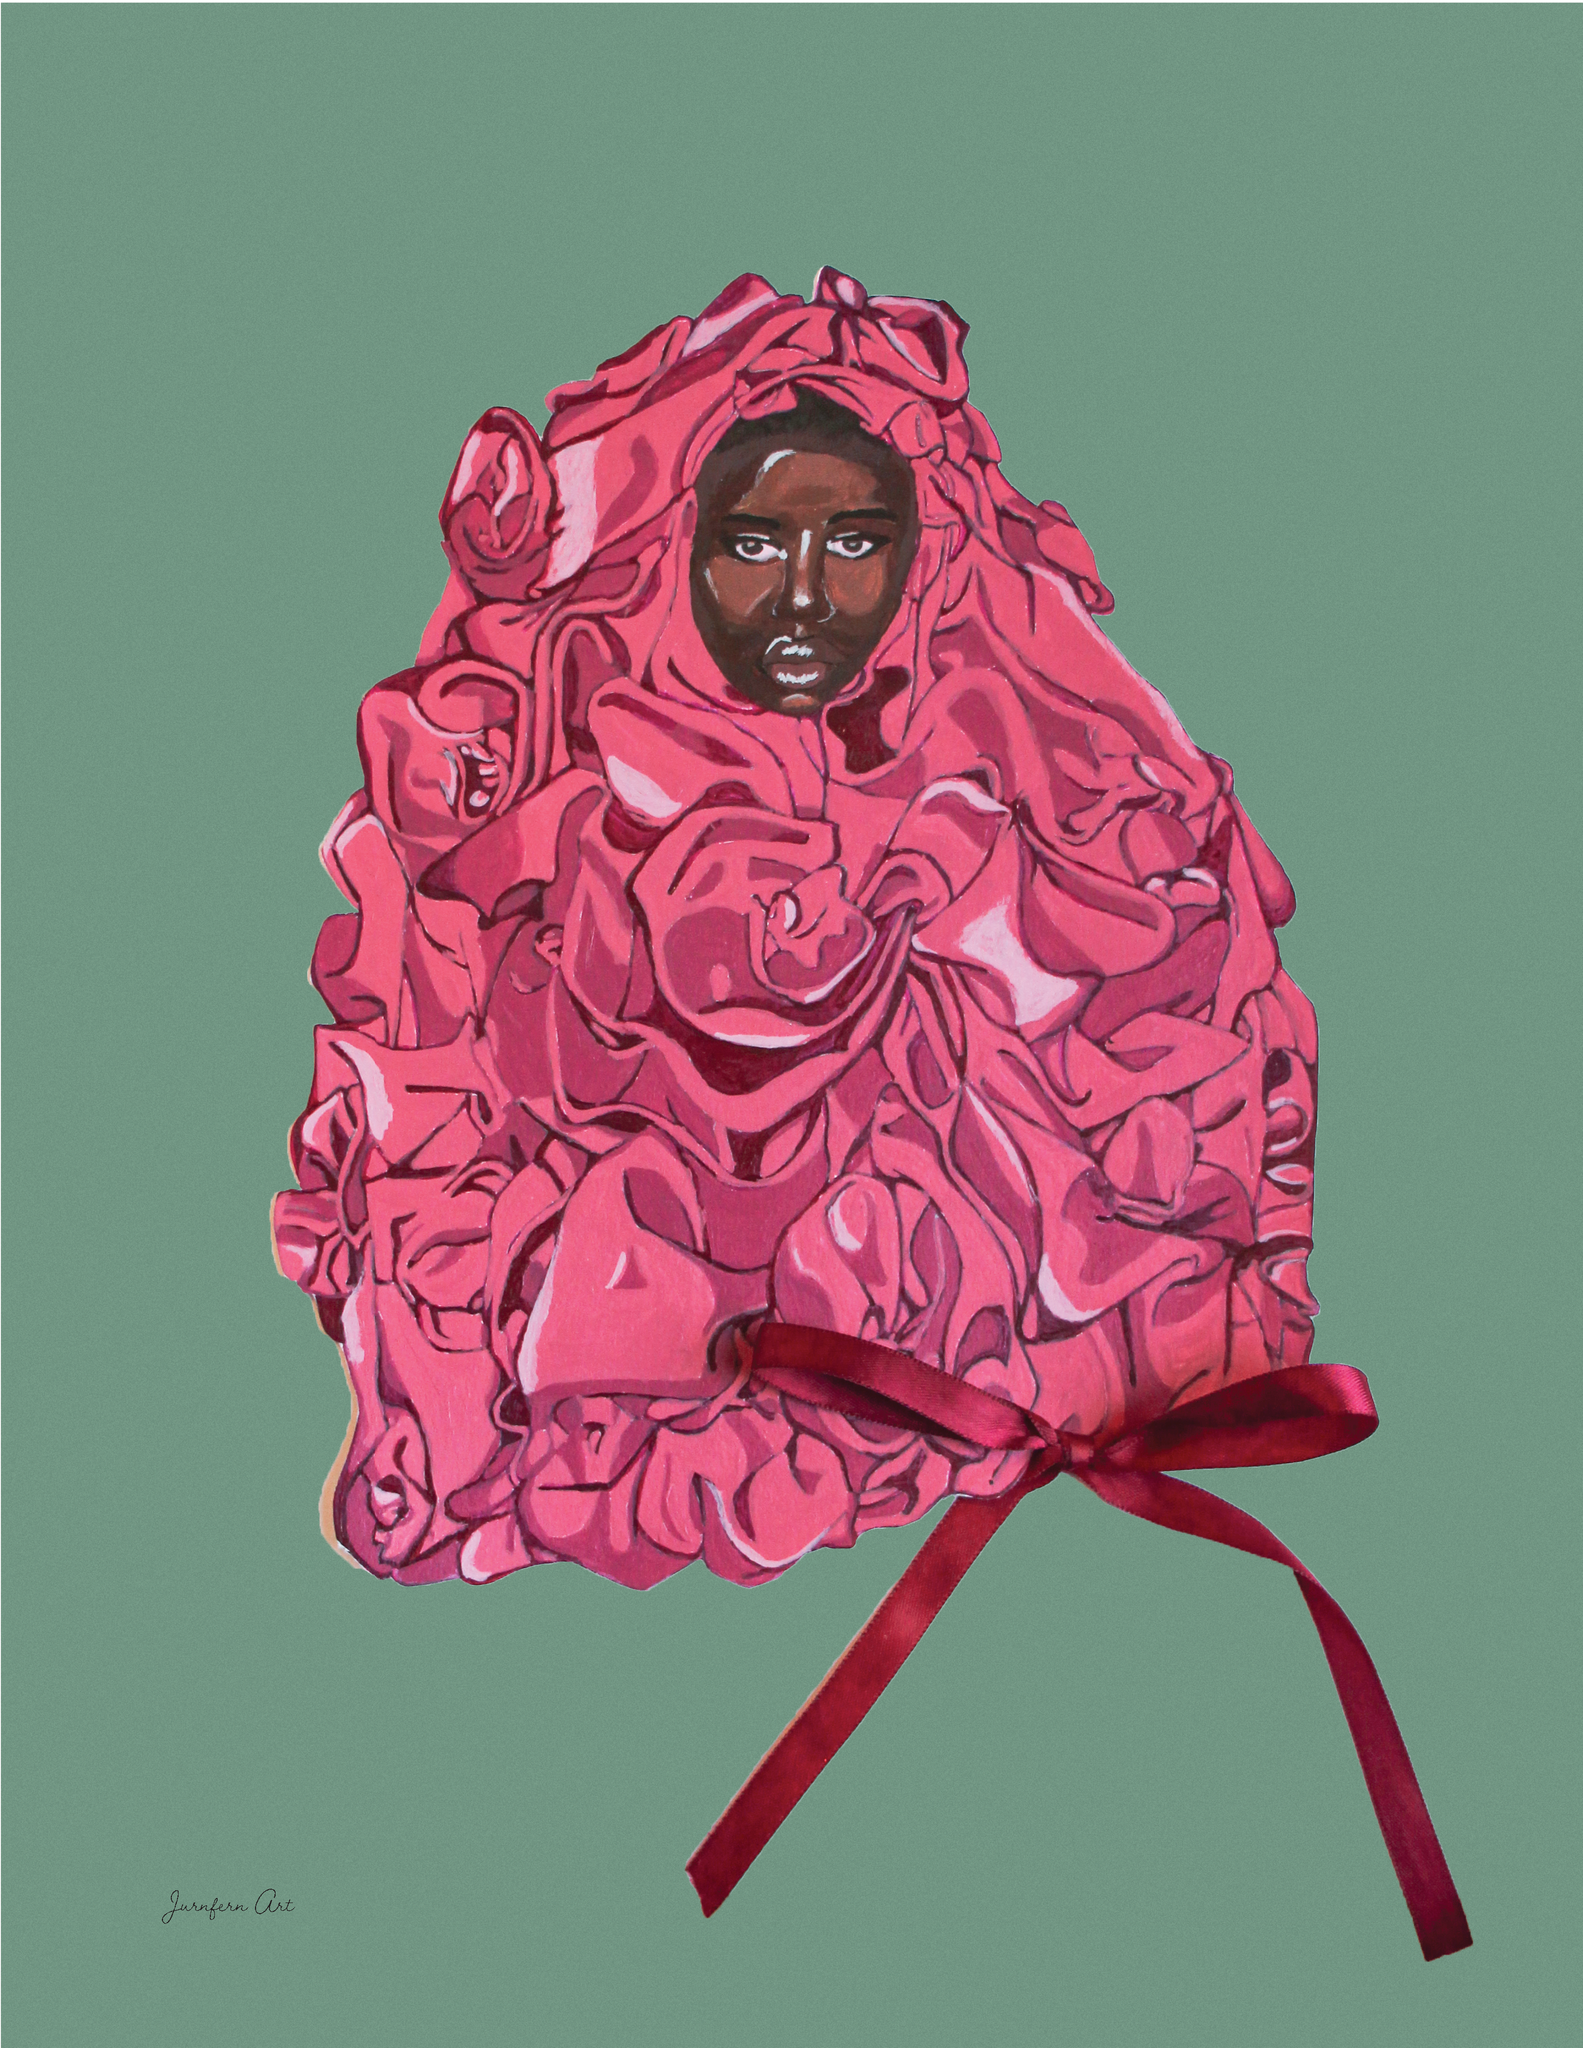 An art print with an illustration of Black supermodel Adut Akech wearing a pink Valentino gown with a bow on it, with a mint green background